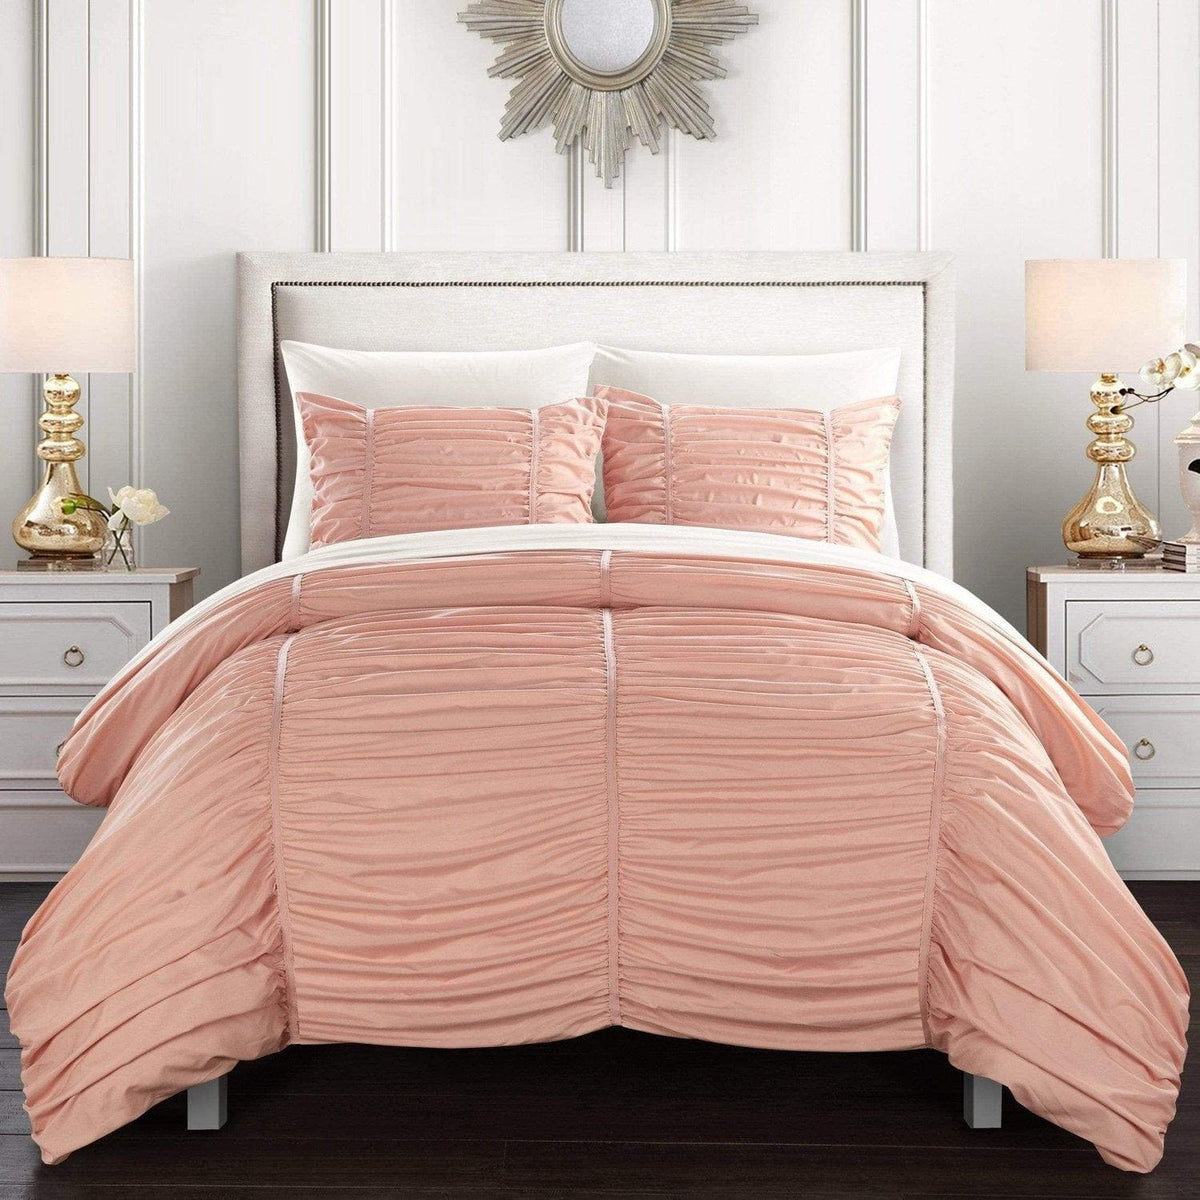 Chic Home Kaiah 7 Piece Striped Comforter Set Coral